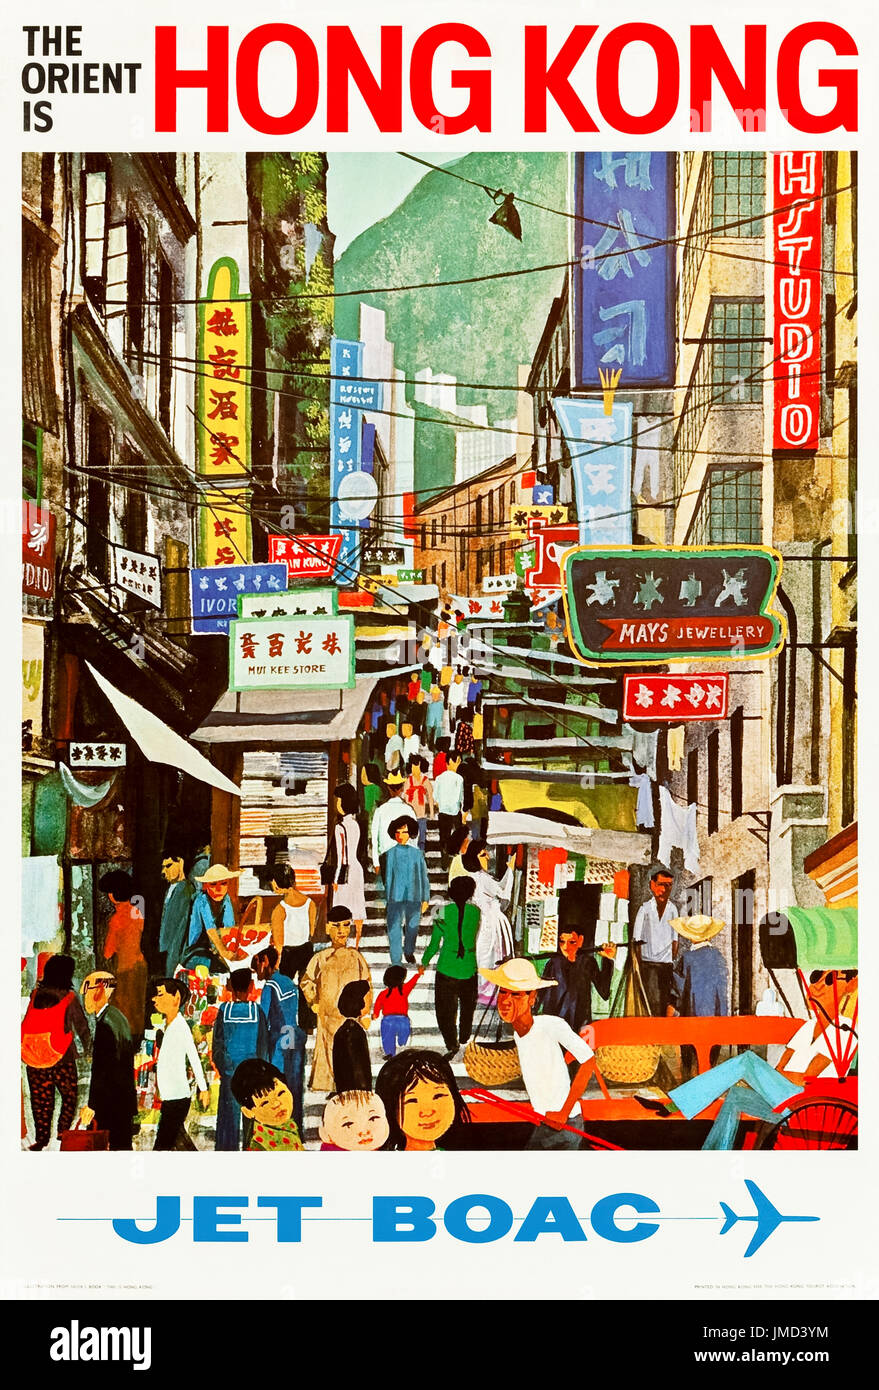 ‘The Orient is Hong Kong’ Jet BOAC (British Overseas Airways Corporation)Tourism Poster featuring an illustration by Miroslav Sasek (1916-1980) from his 1965 children’s book “This is Hong Kong”. Stock Photo